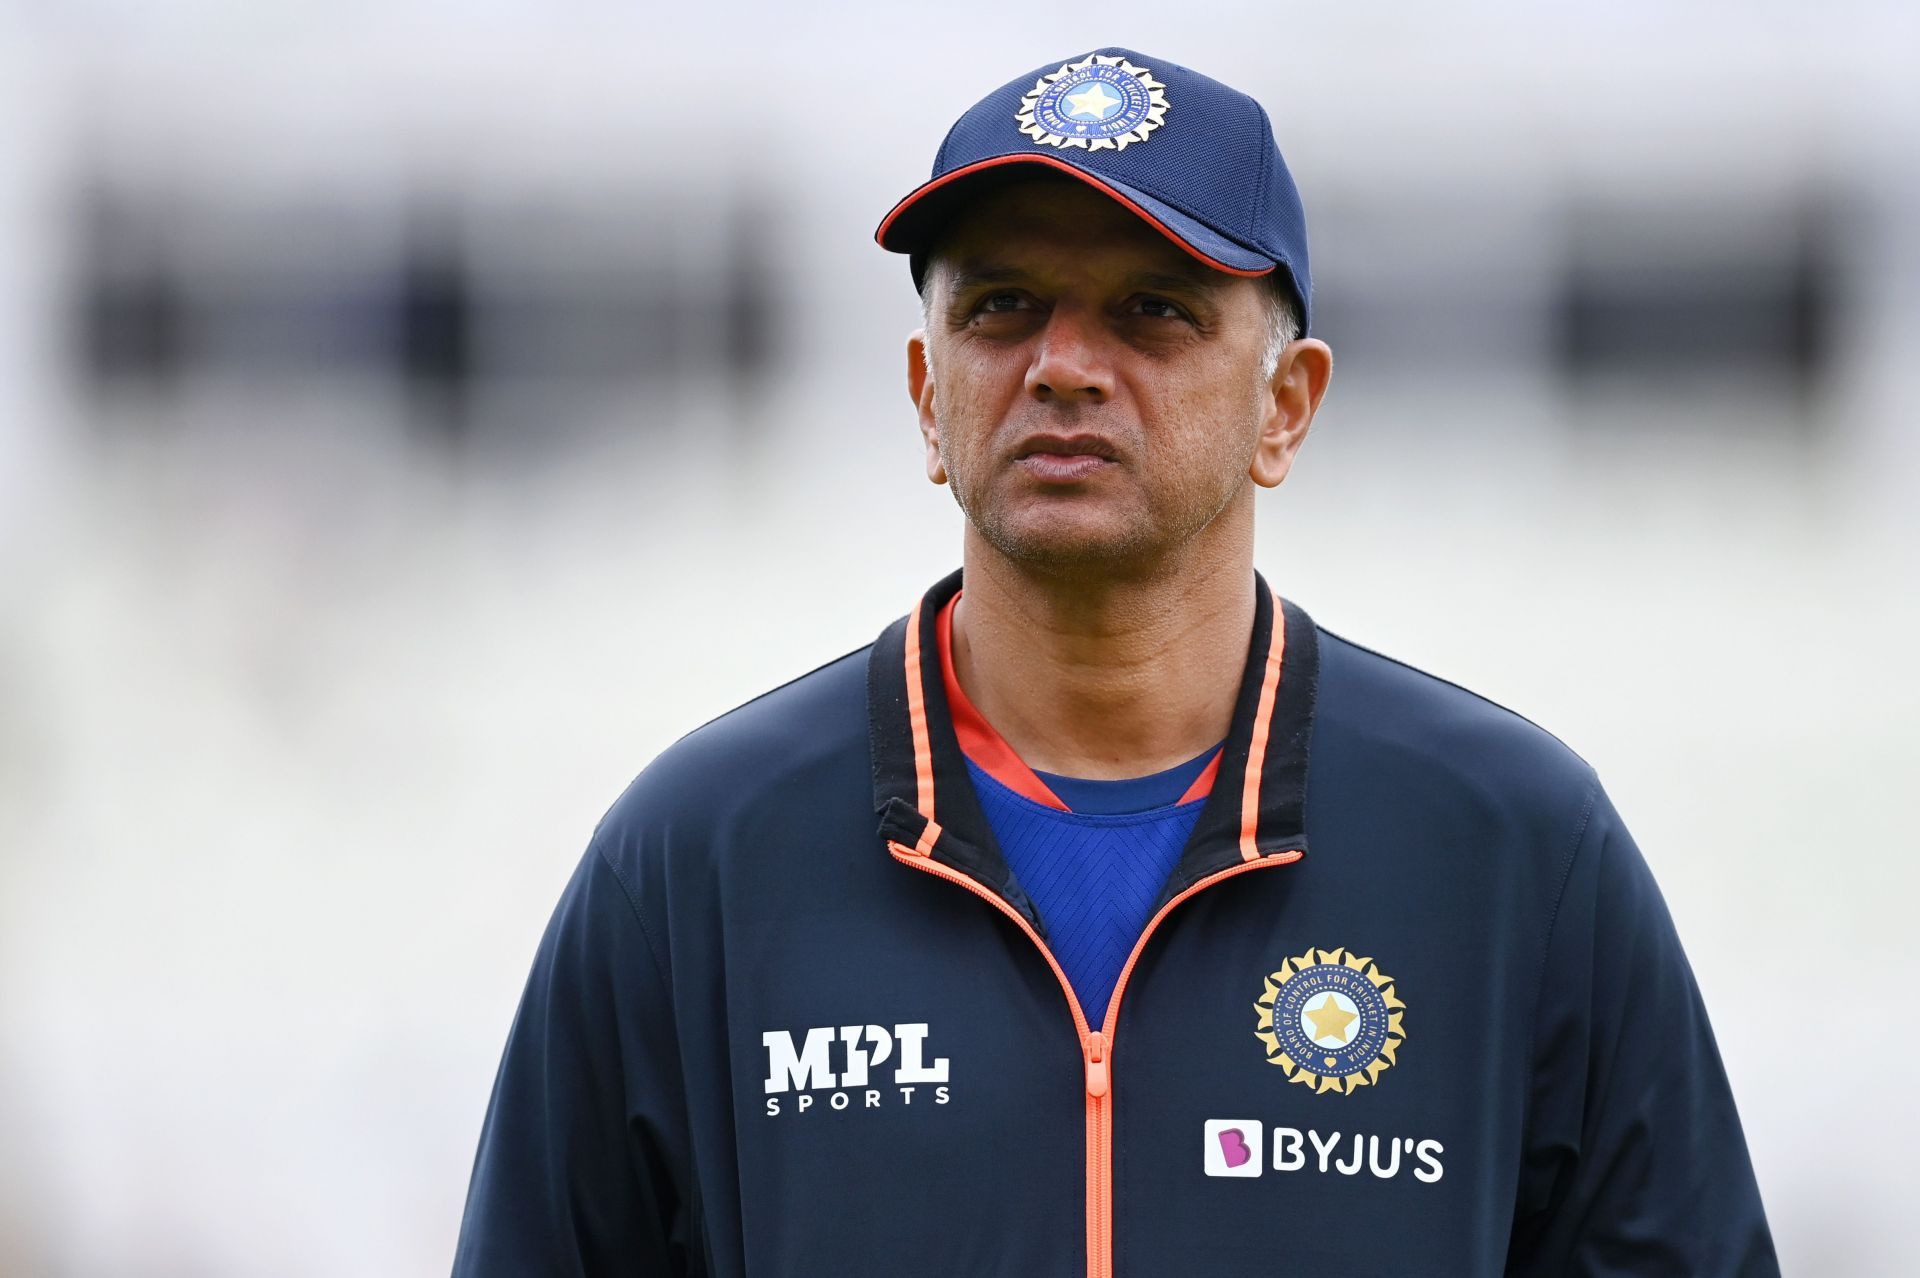 Rahul Dravid is the head coach of the Indian cricket team (Image: Getty)